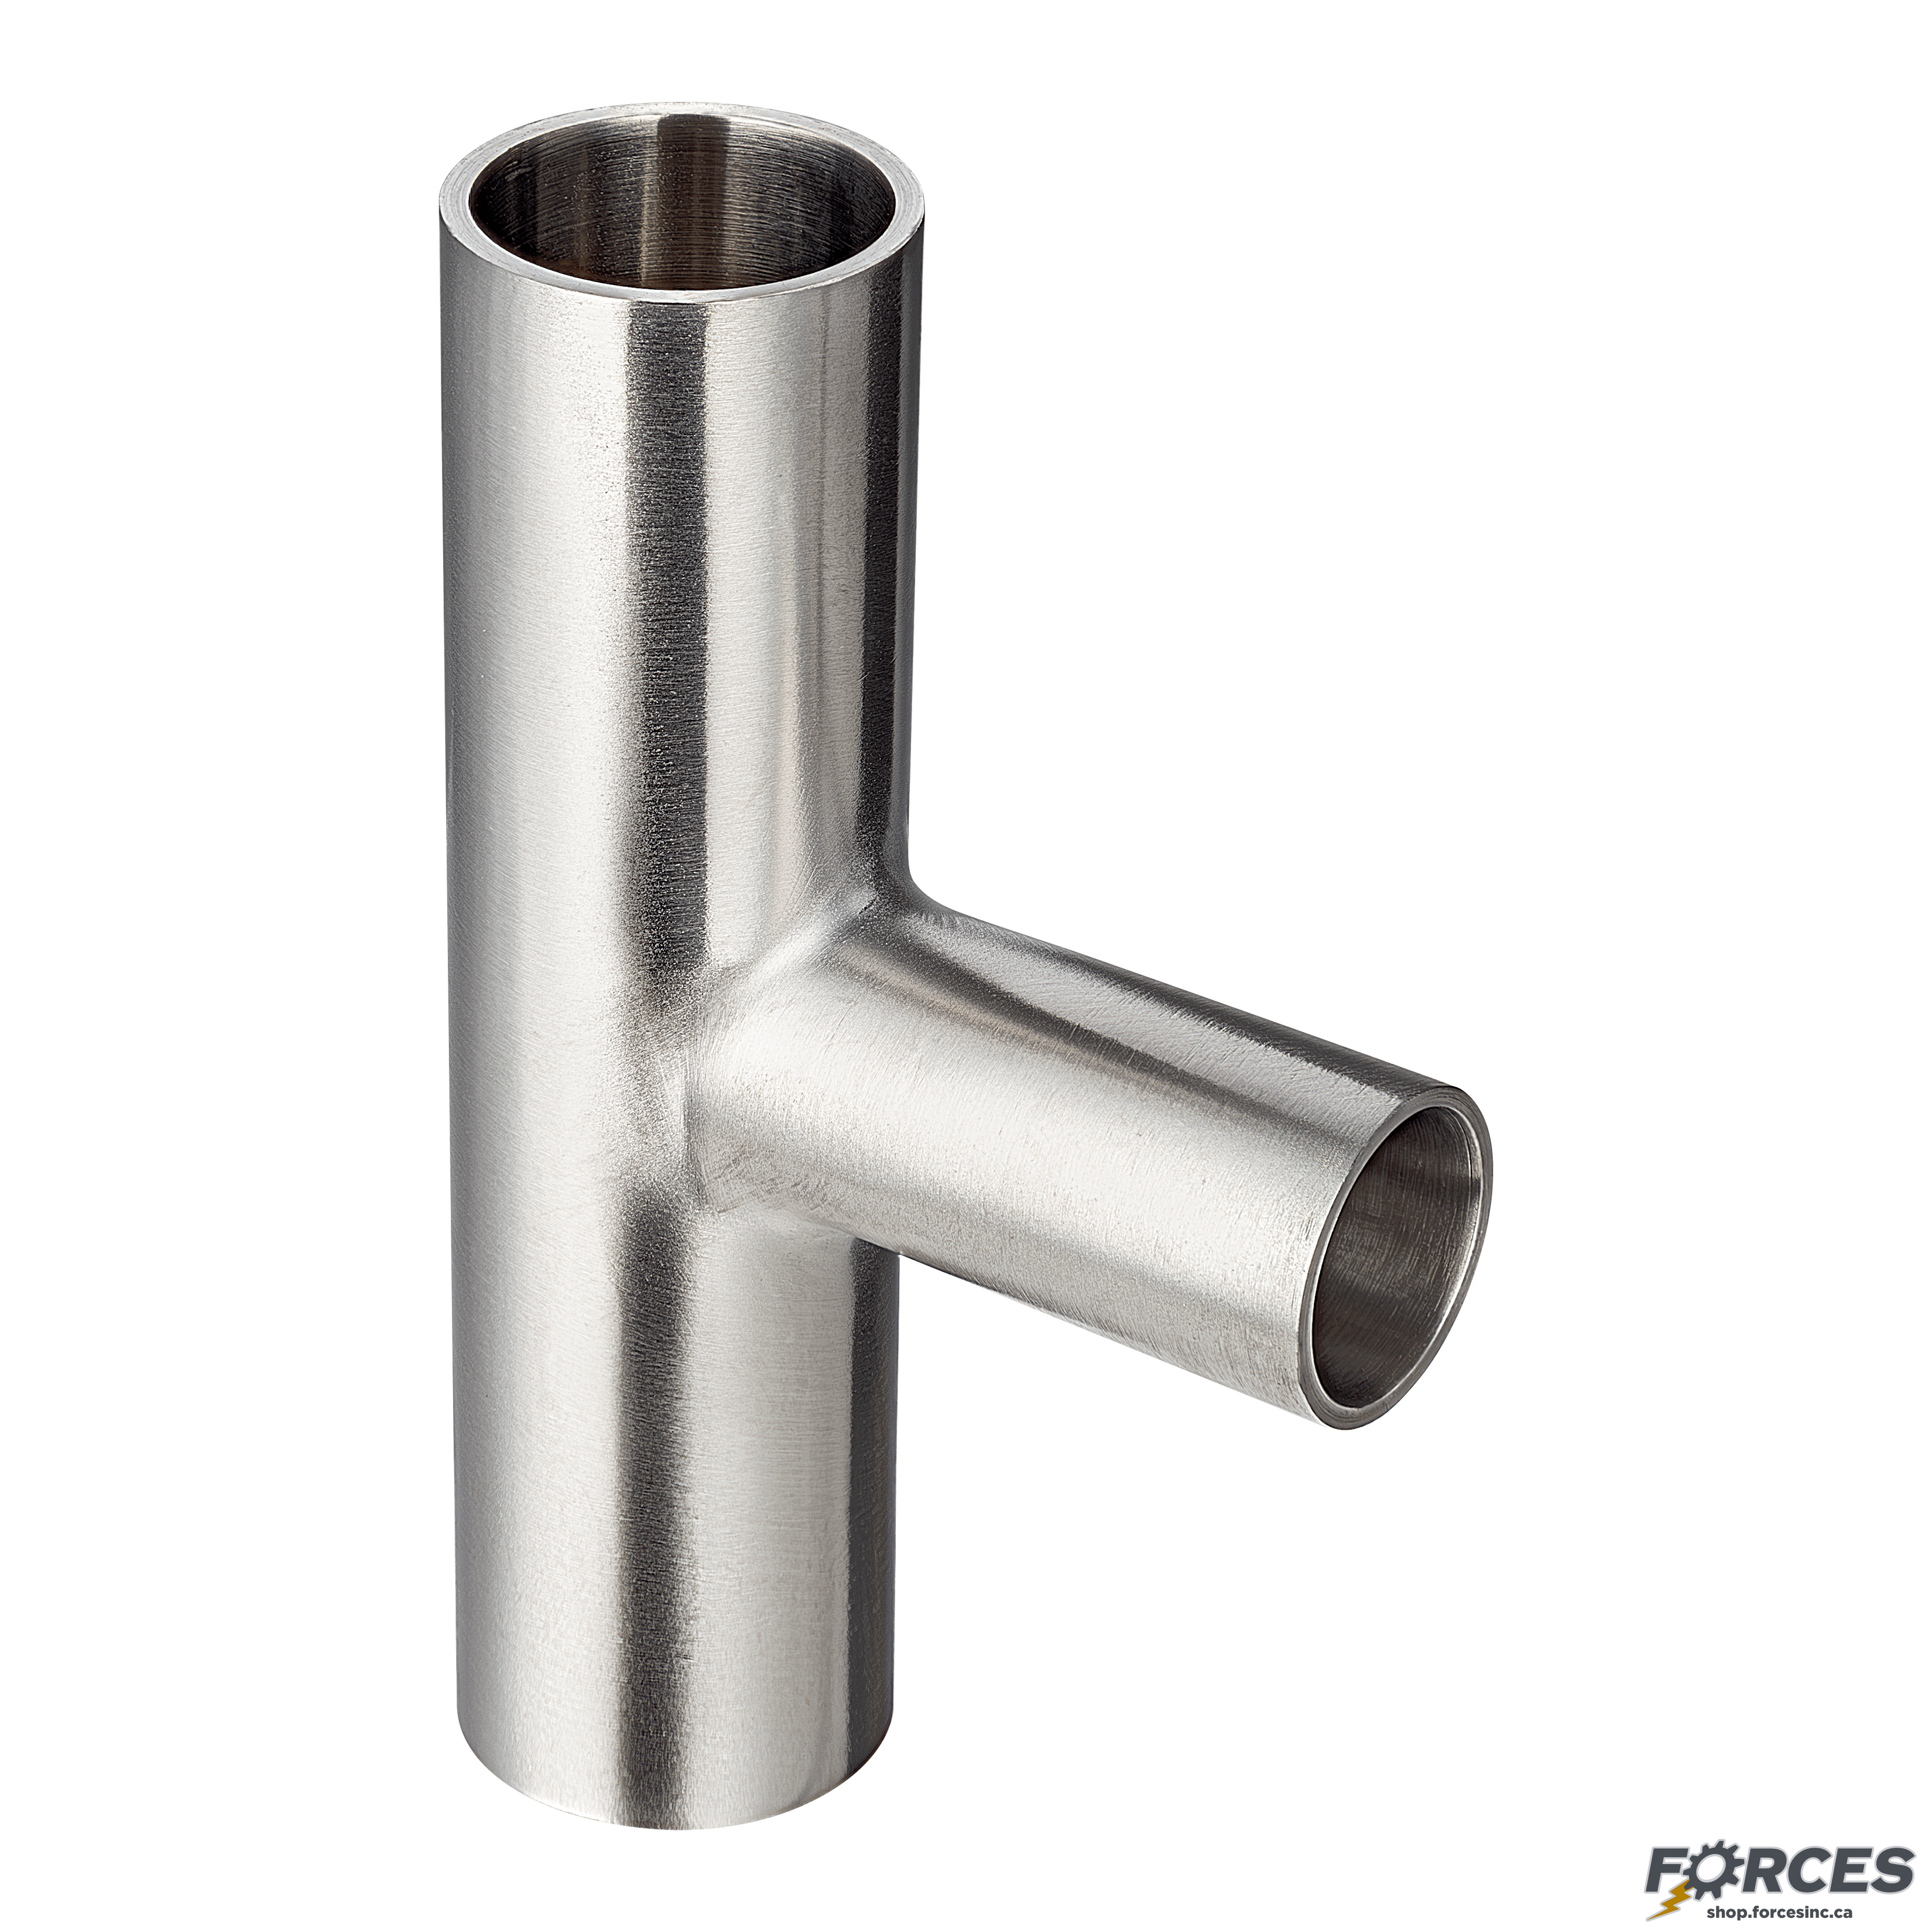 2" x 3/4" Butt Weld Tee Reducer - Stainless Steel 316 - Forces Inc